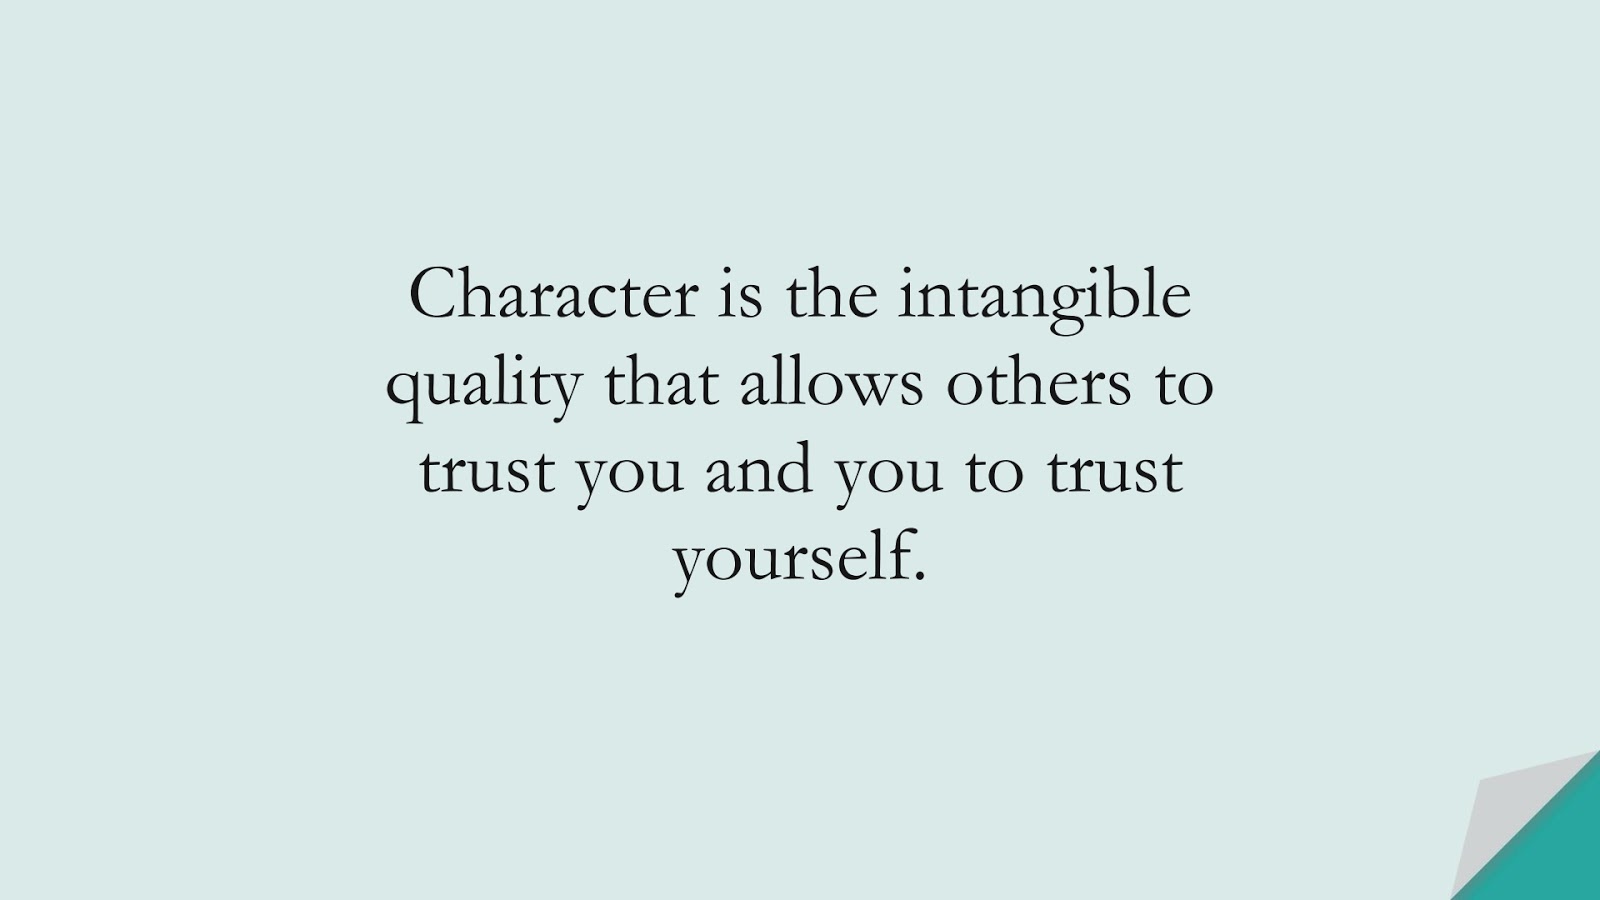 Character is the intangible quality that allows others to trust you and you to trust yourself.FALSE